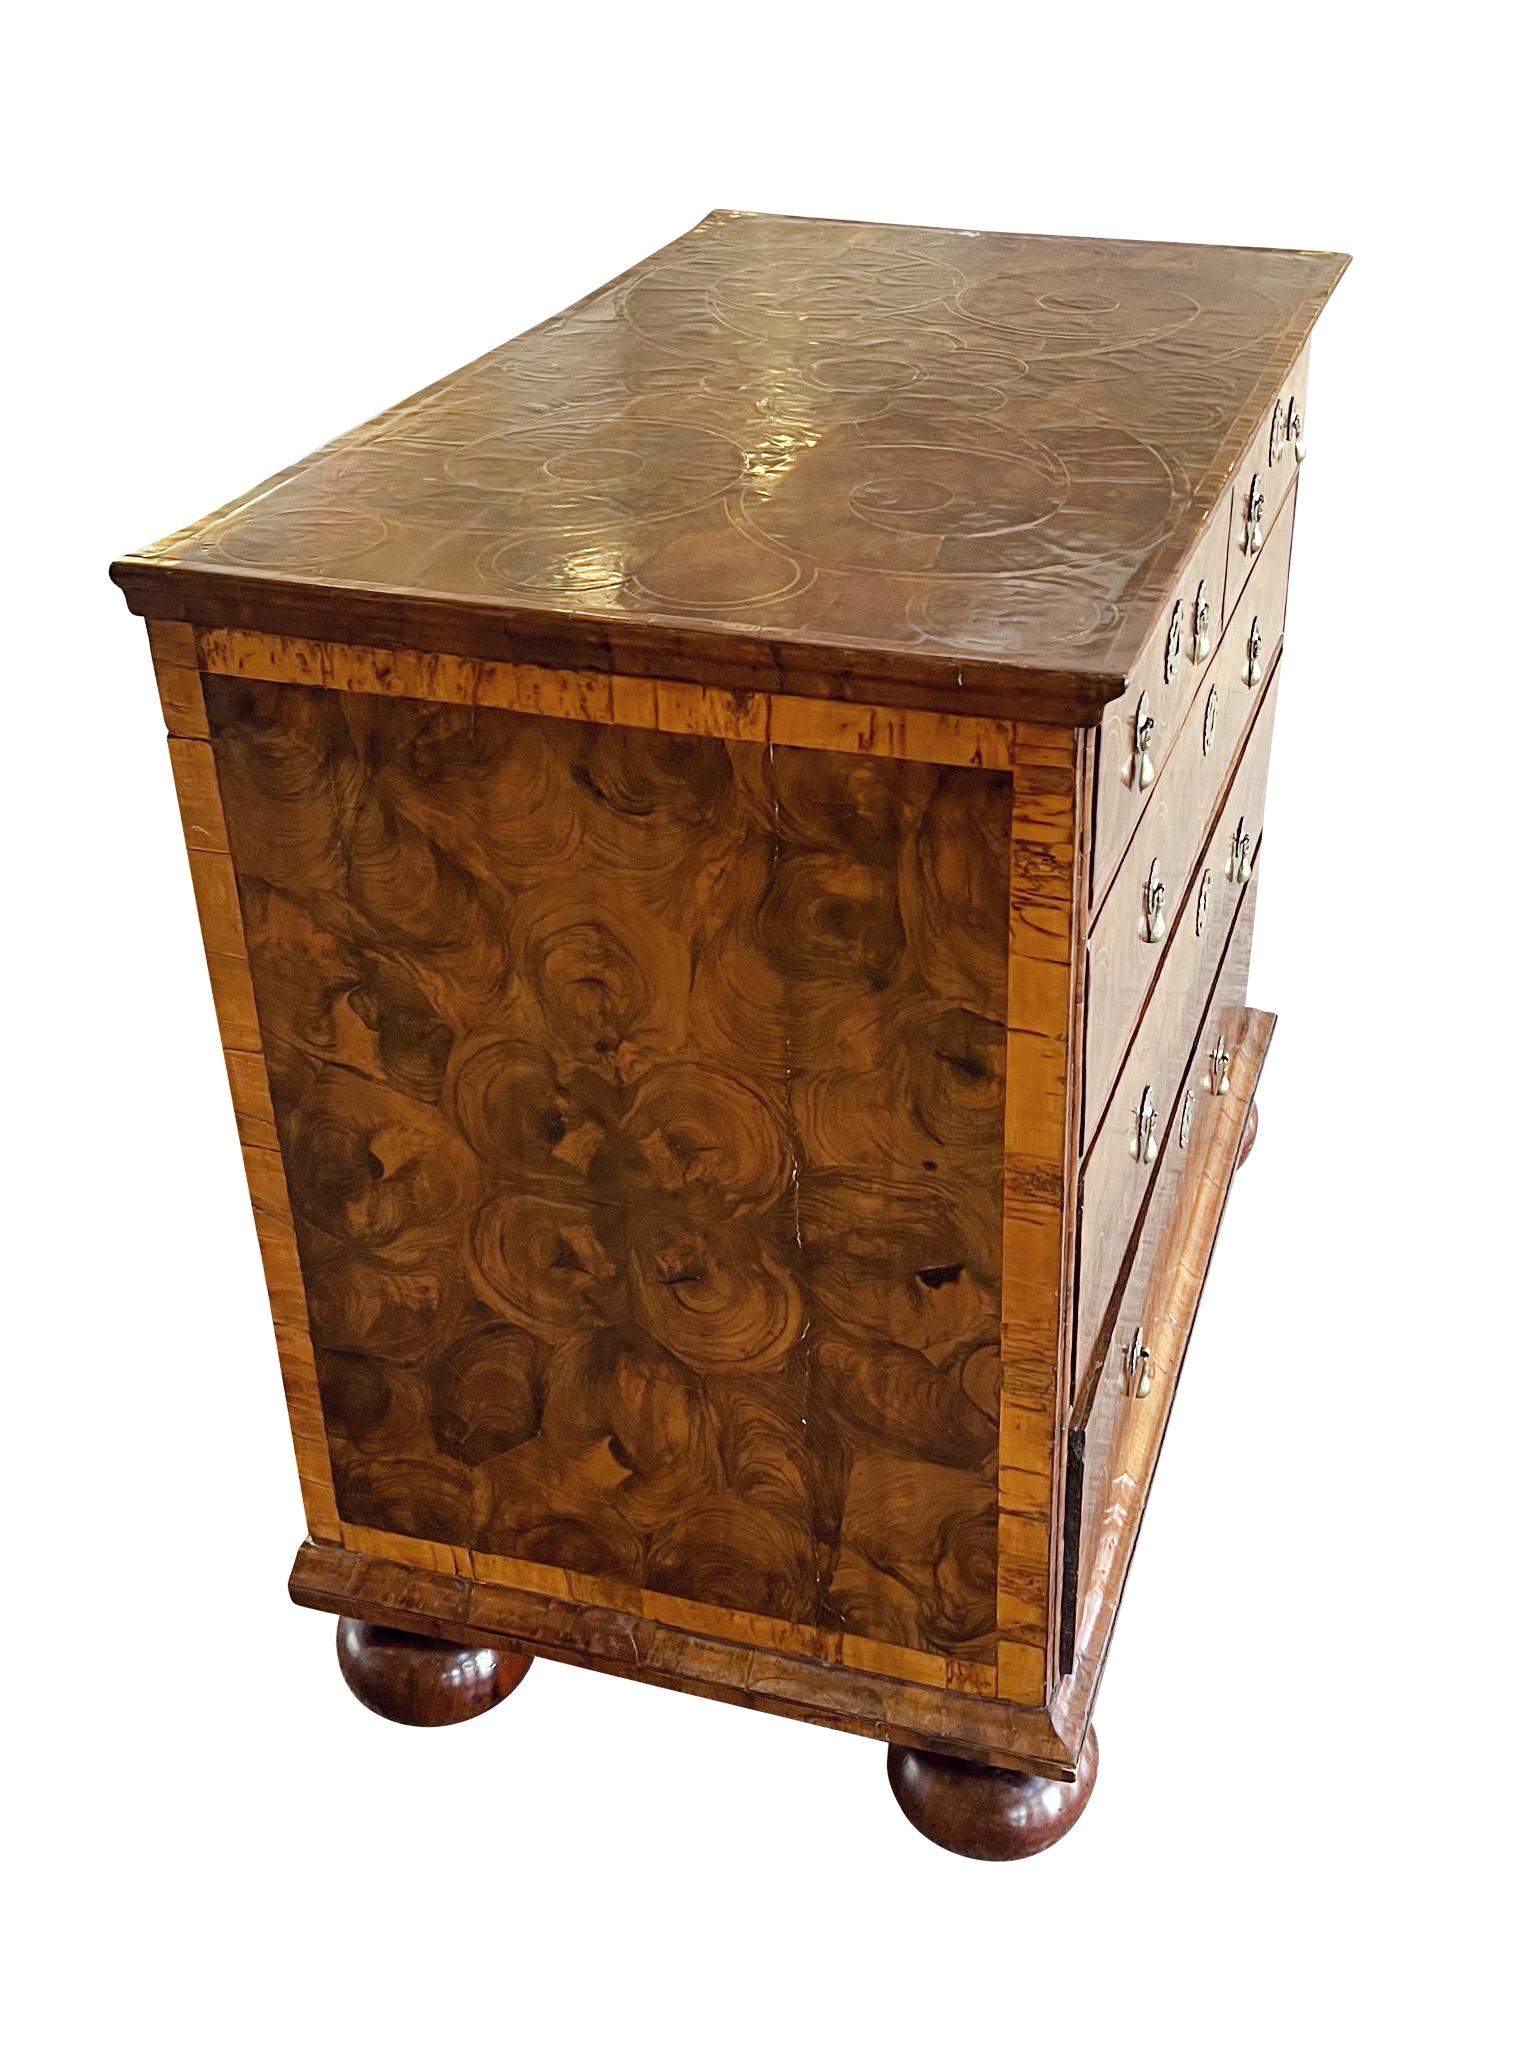 Hand-Crafted 18th Century William & Mary Chest of Drawers with Oyster Inlays